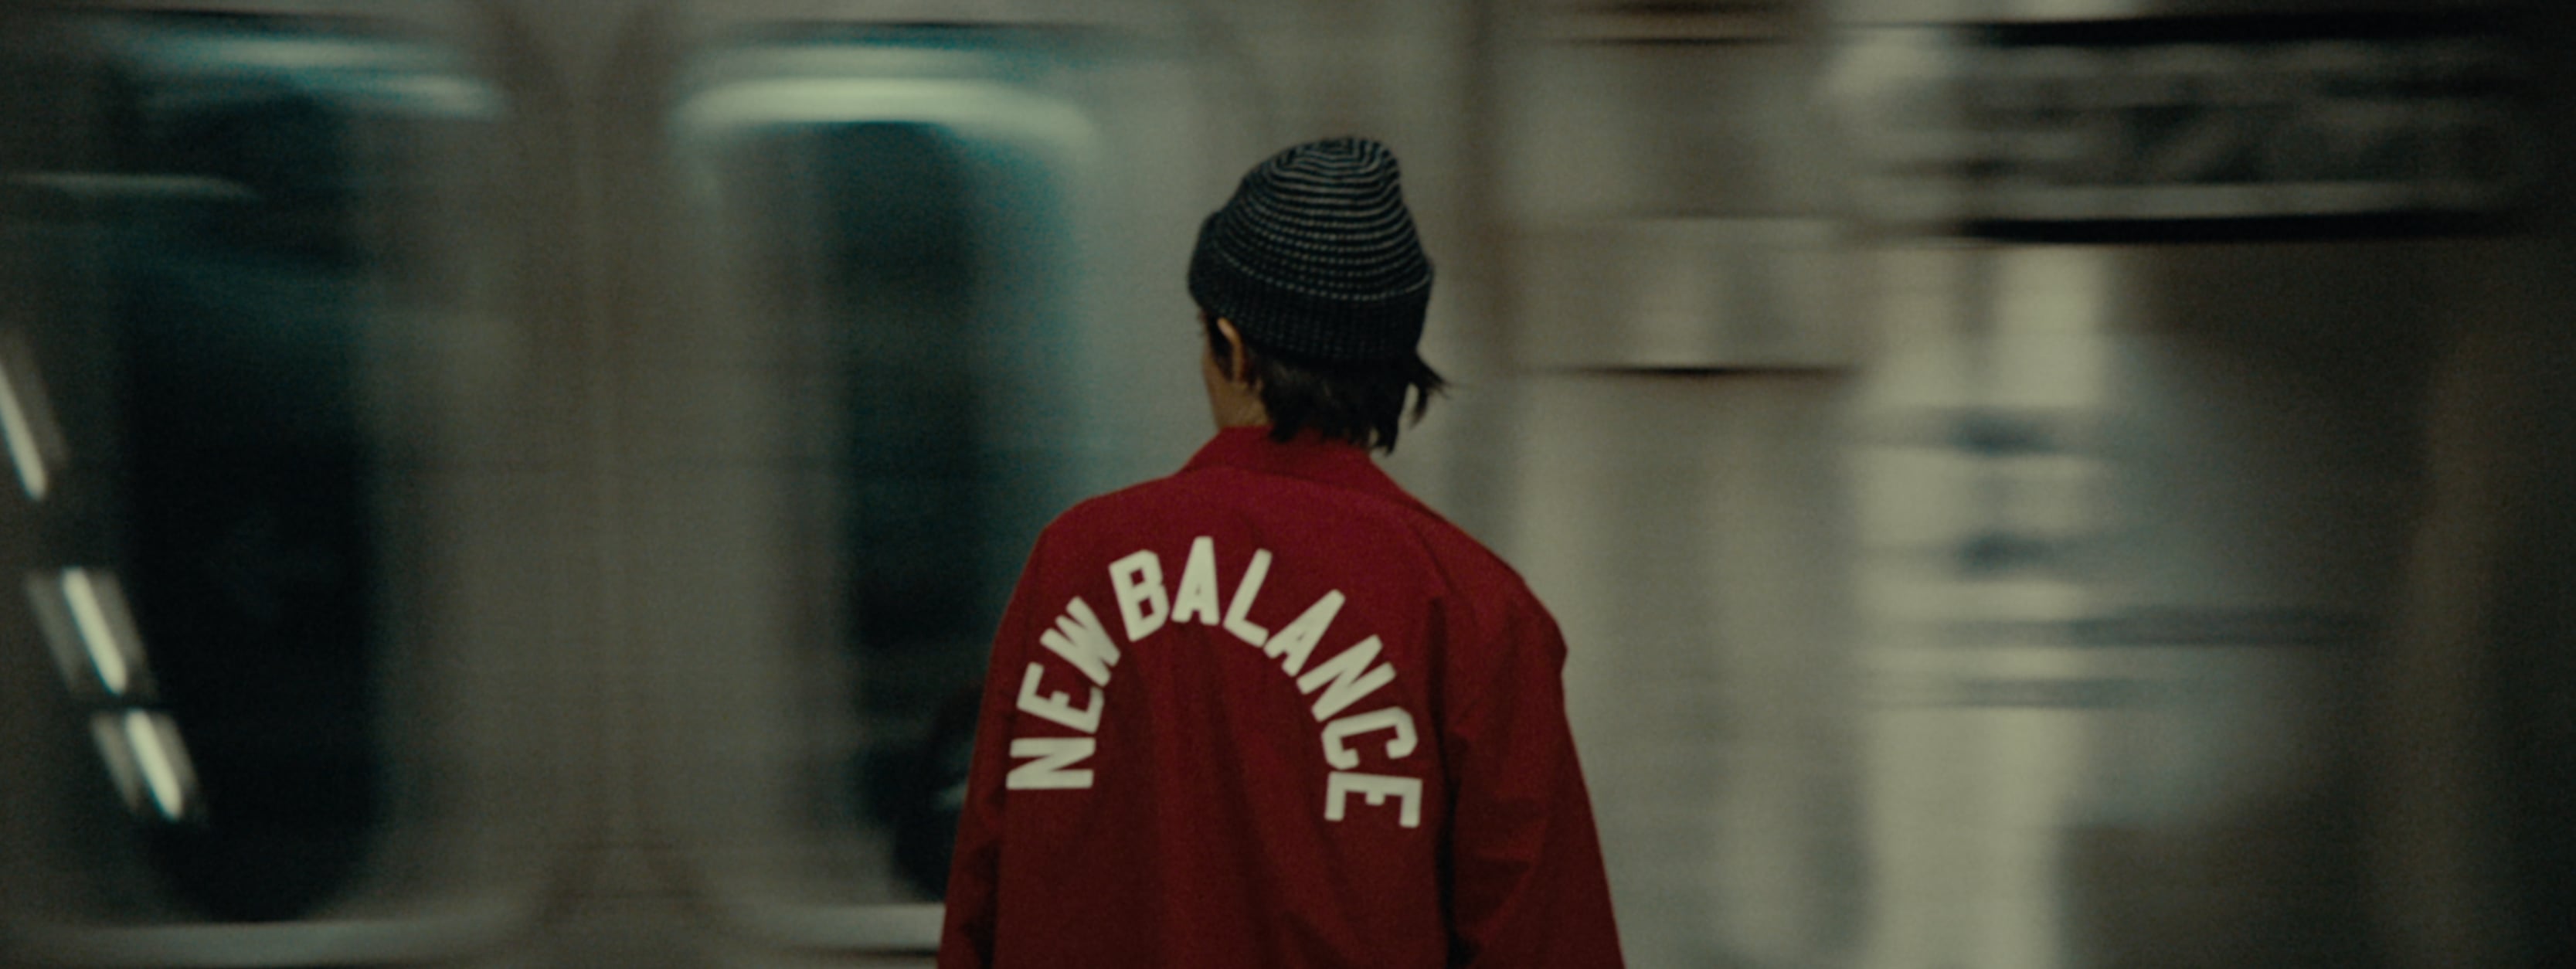 New Balance "A Letter to My Future Self - Alexis Sablone" - Director's Cut